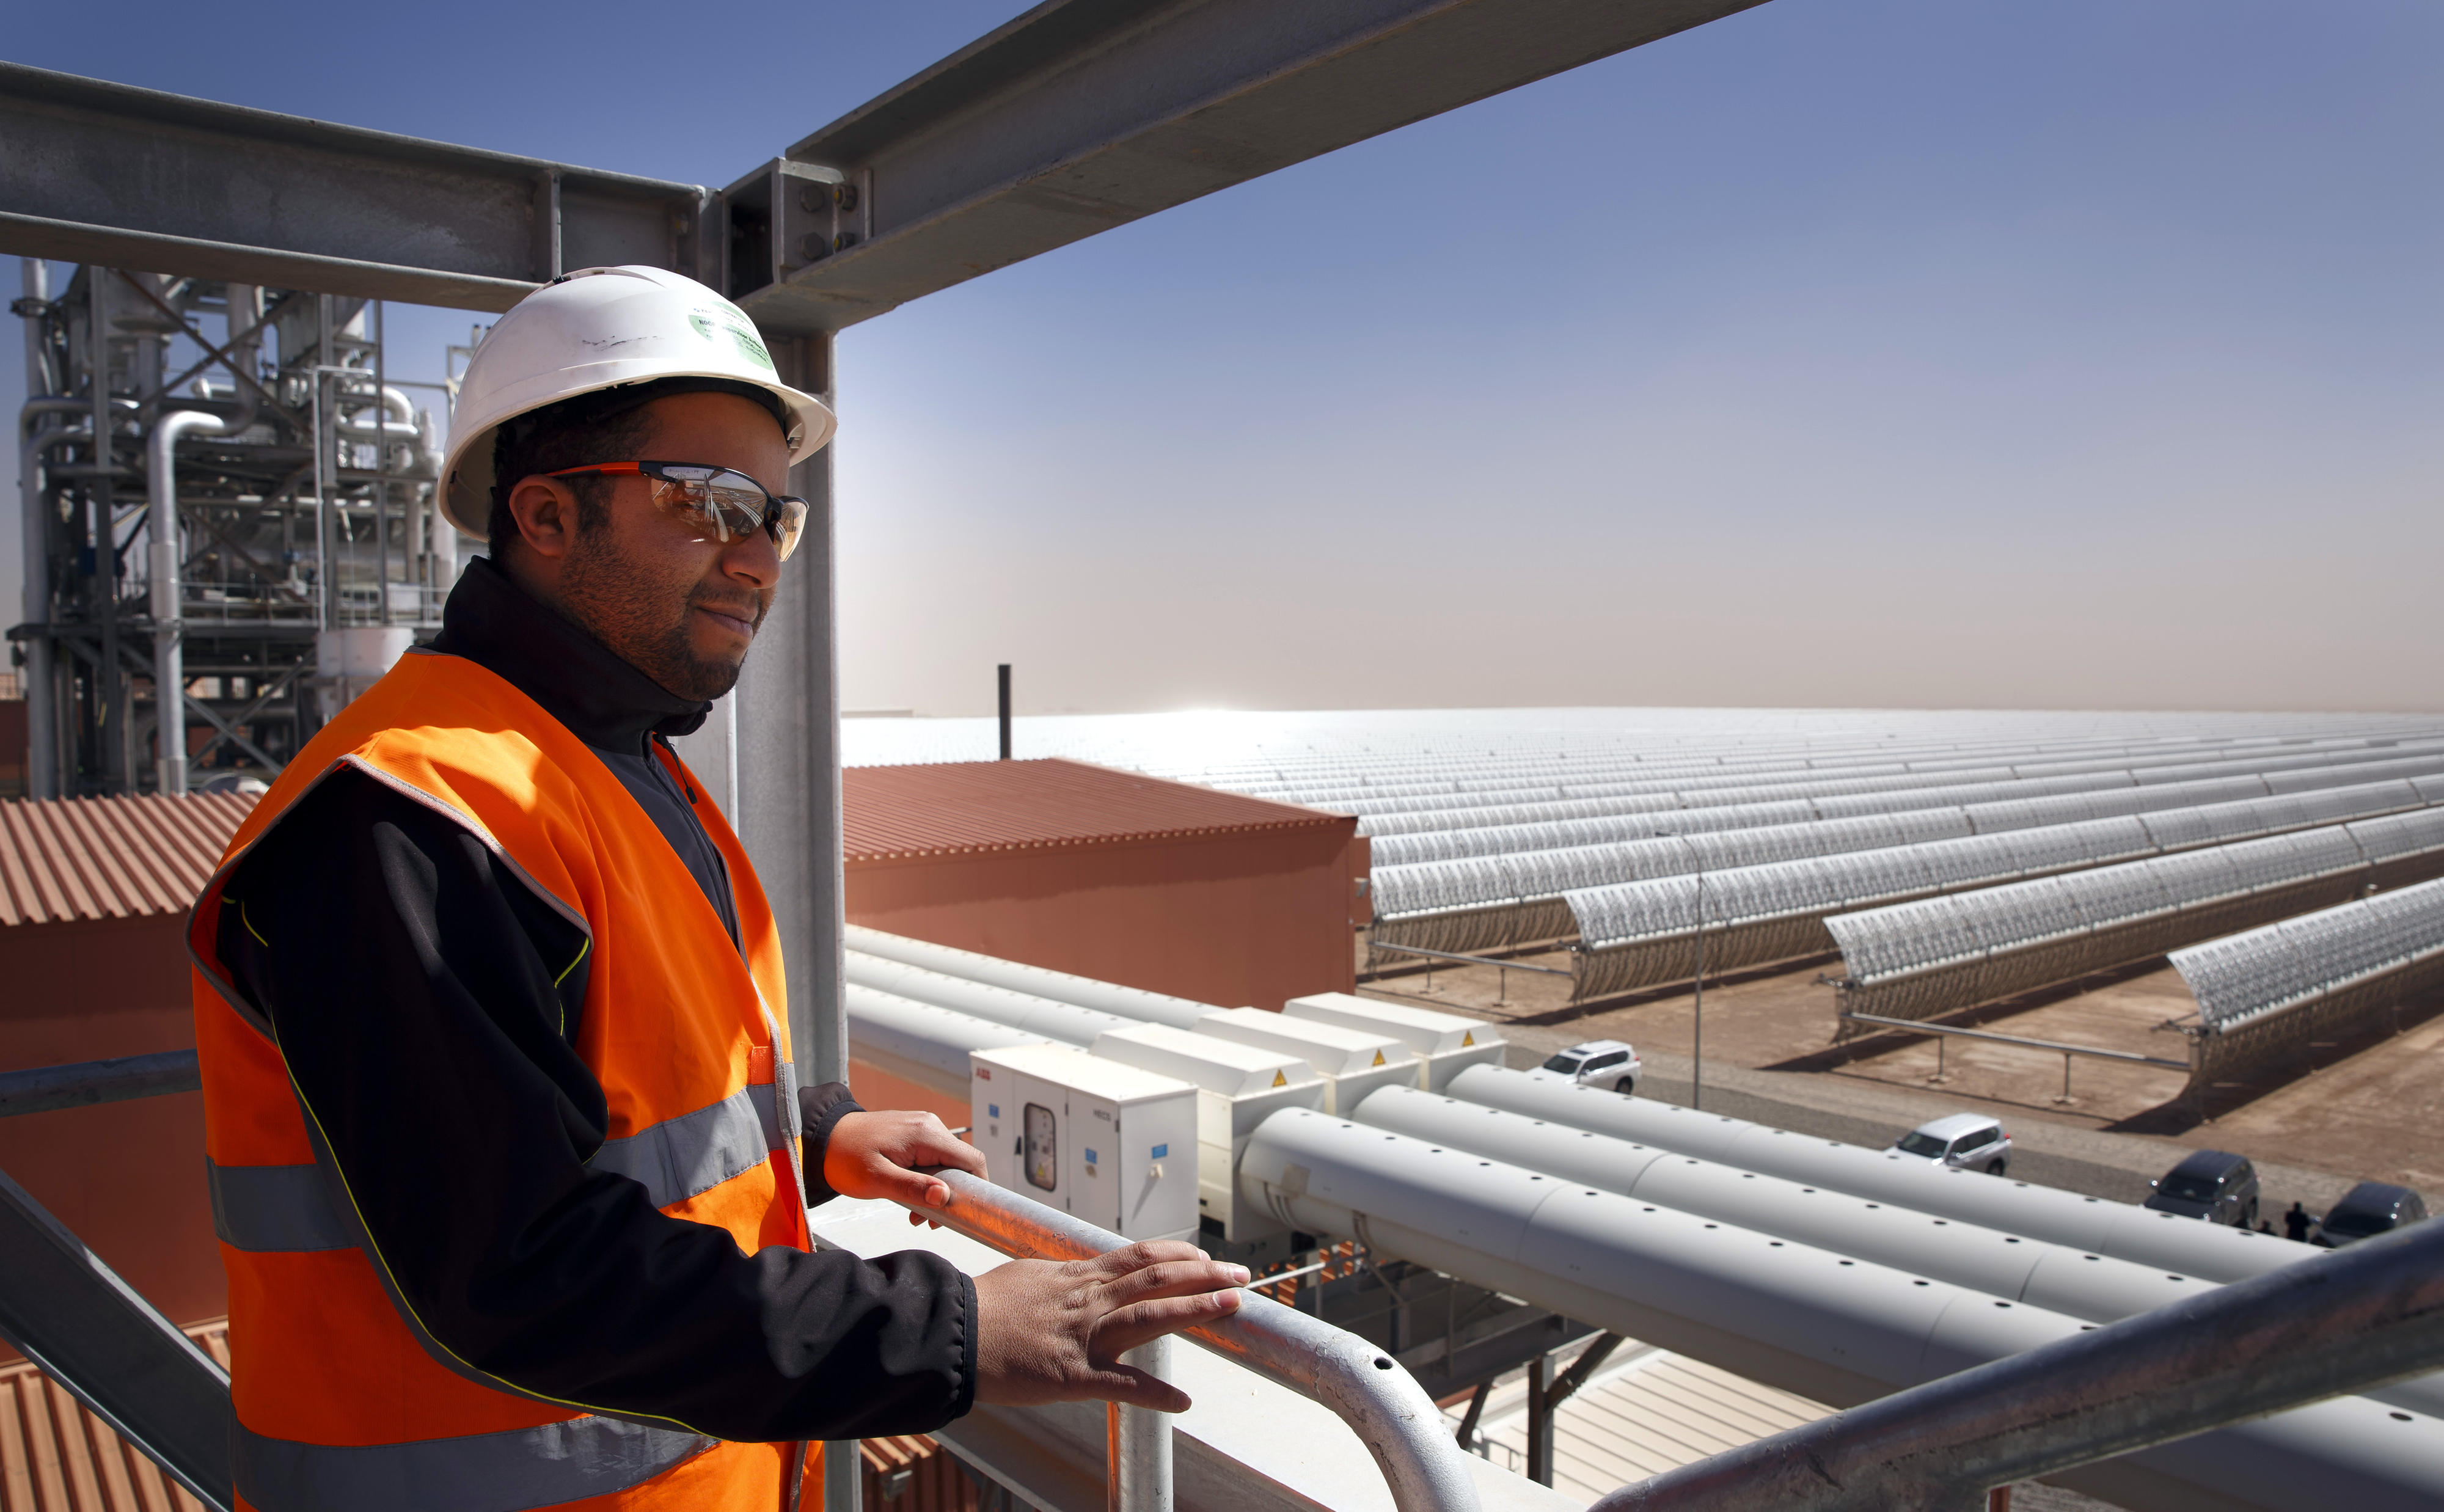 An employee of the solar power plant in Ouarzazate looks over a solar field.